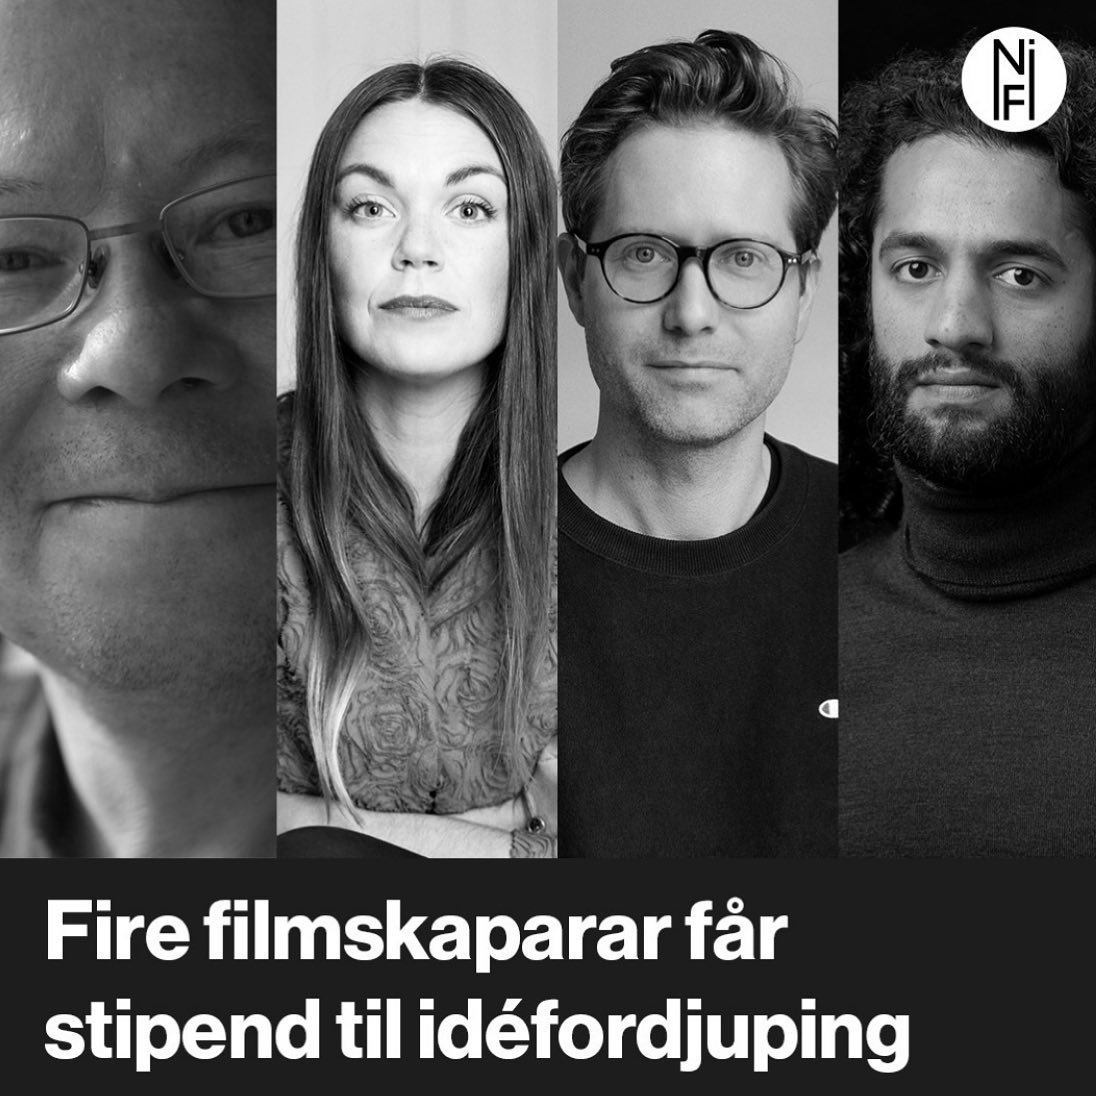 Moving into the weekend w a lot of gratitude: Just received support from the Norwegian Film Institute to write my new screenplay. 🙏🏻 Thank you NFI.